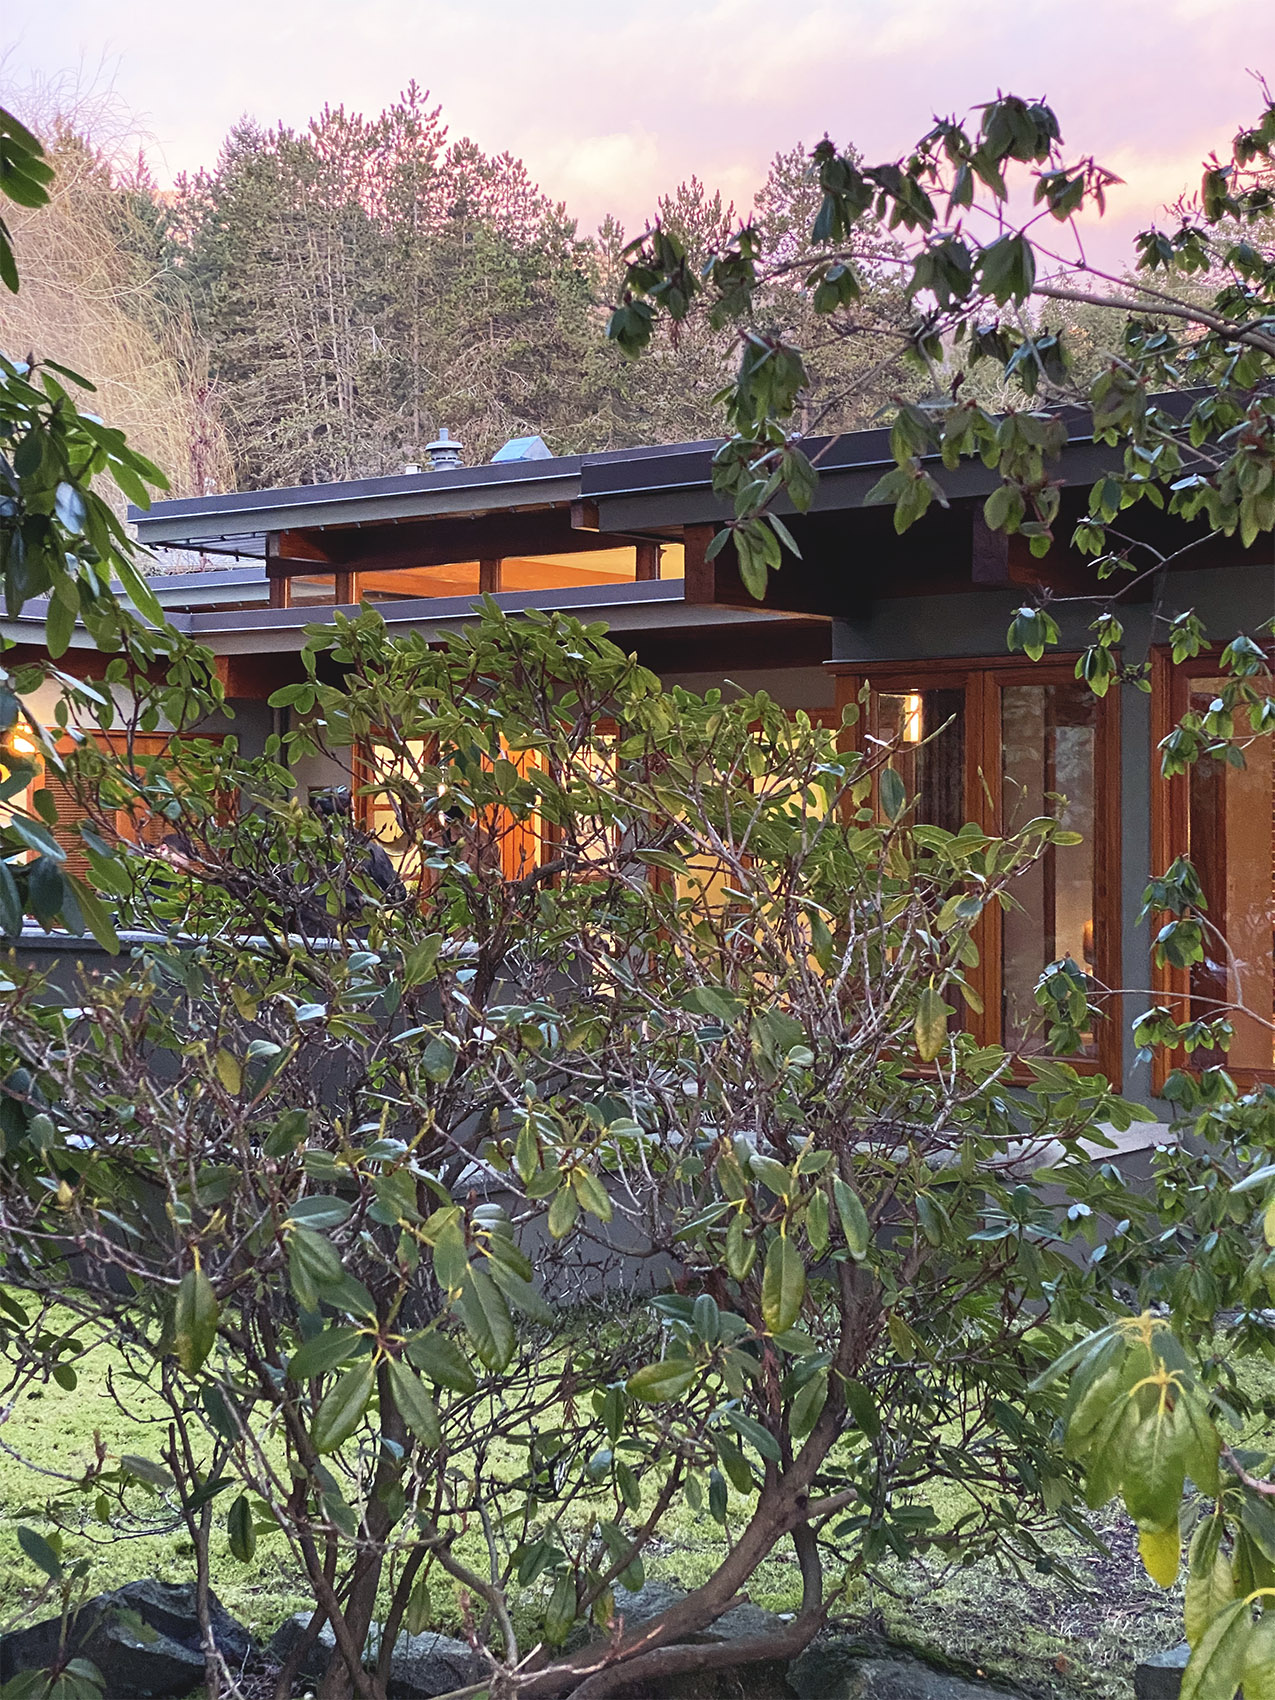 Capilano Highlands “Neoteric” House, 1951/ 1999